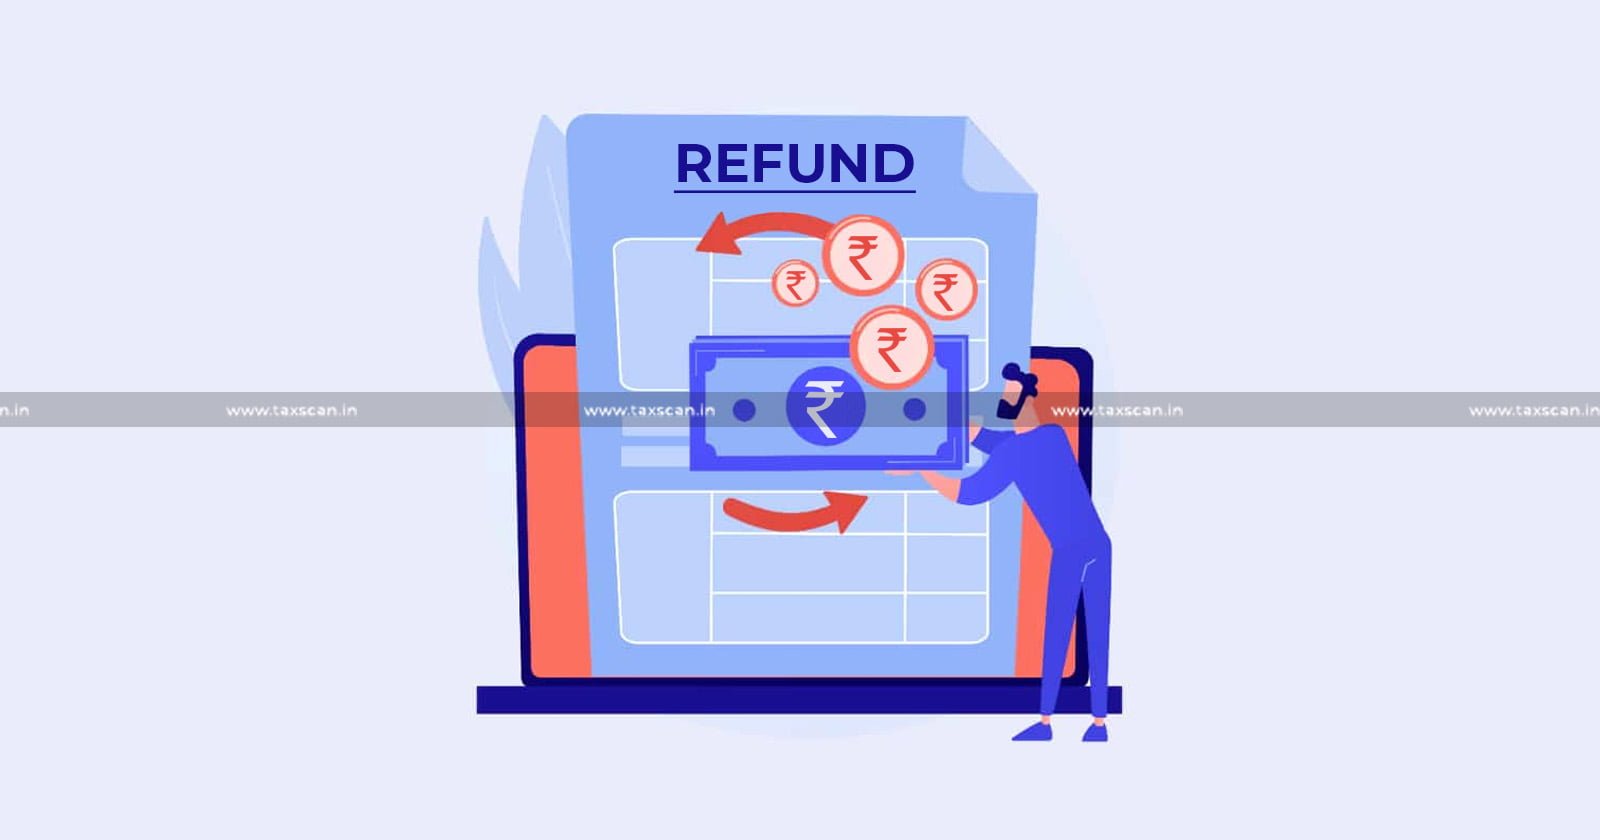 Interest on Excise Duty Refund Starts from Date of Delay till Sanction of Refund - Interest - Excise Duty Refund - Excise Duty - Refund - CESTAT - Taxscan